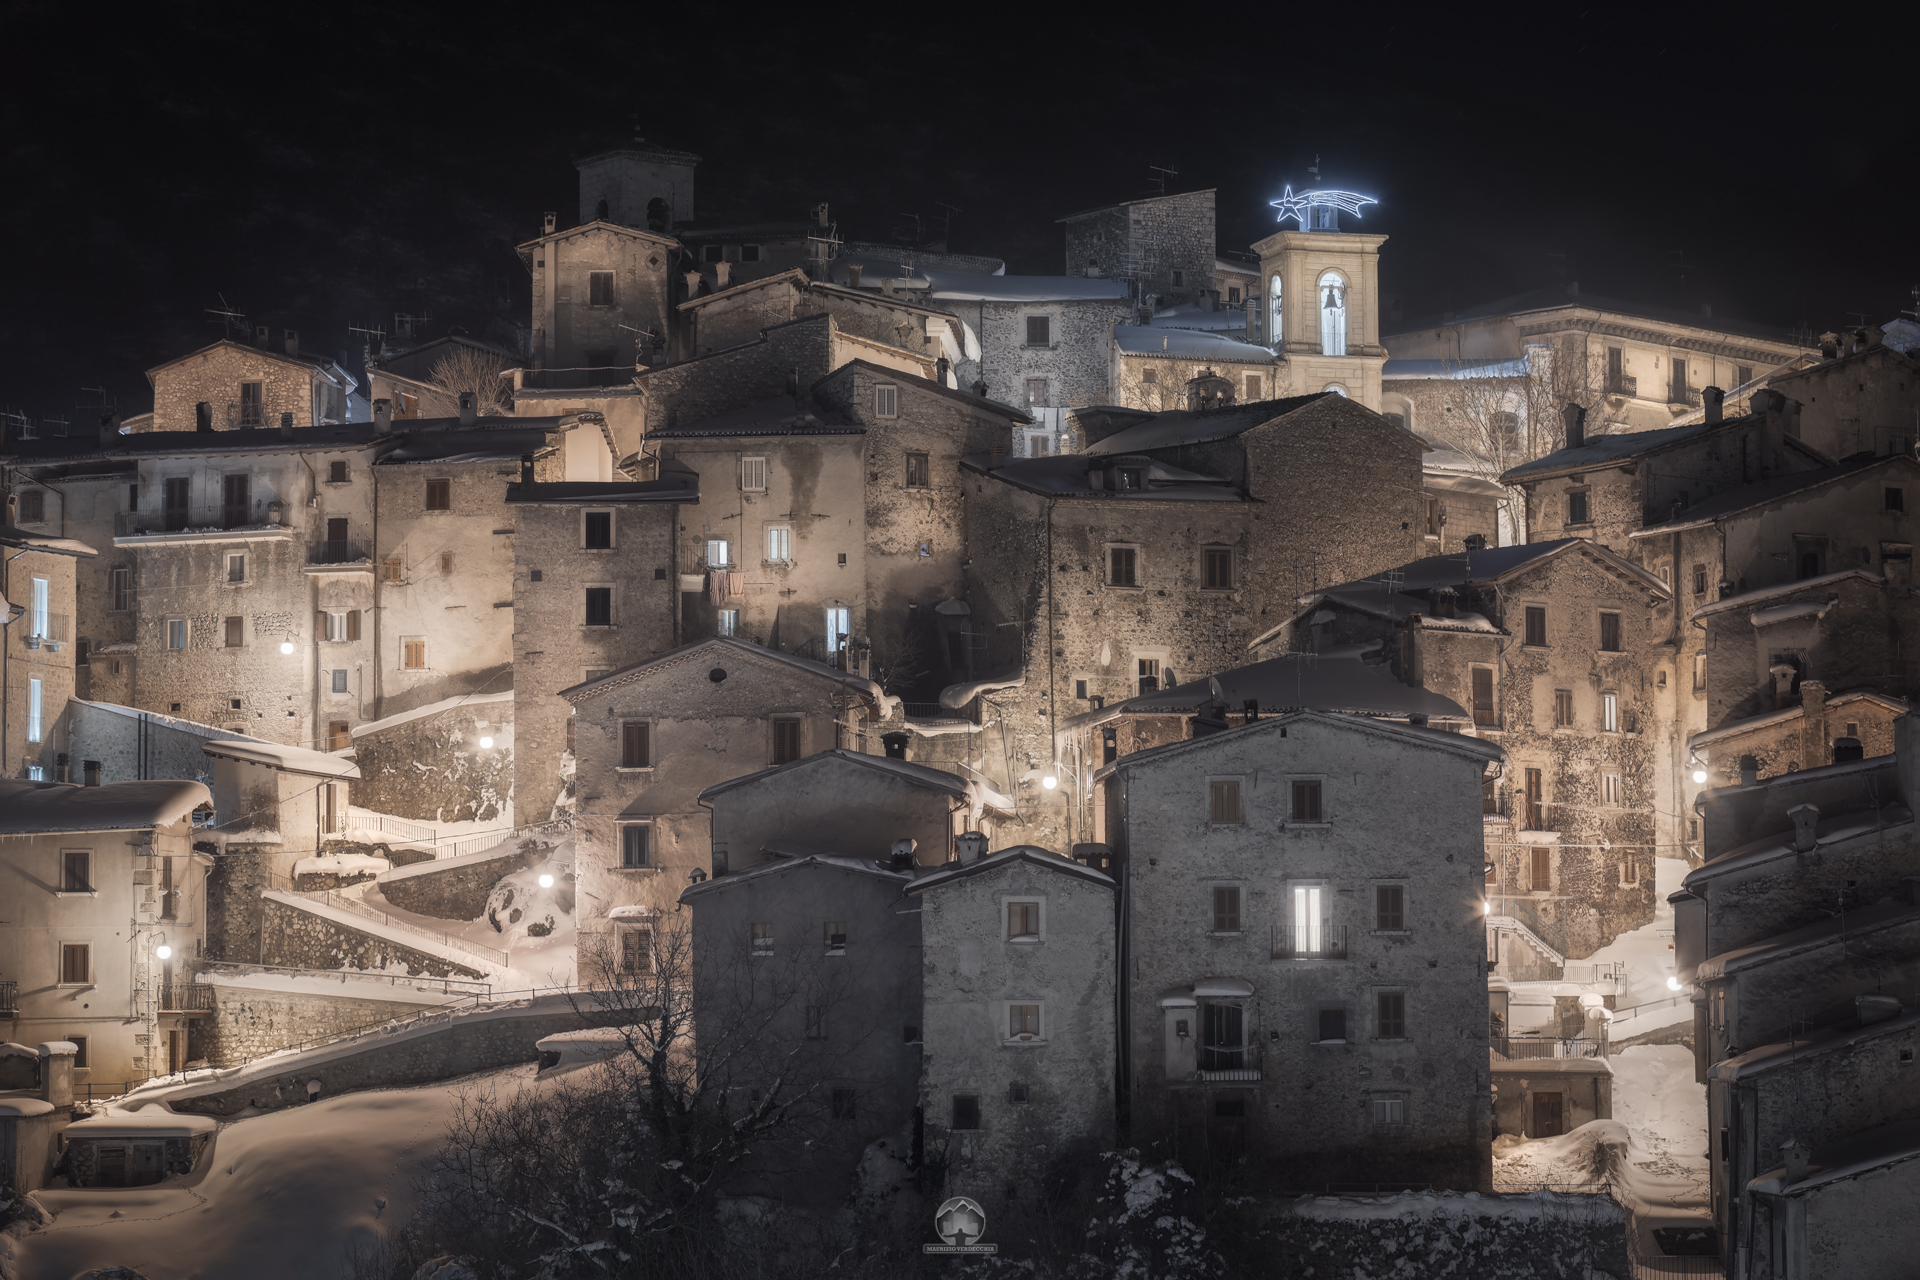 Winter in Scanno...